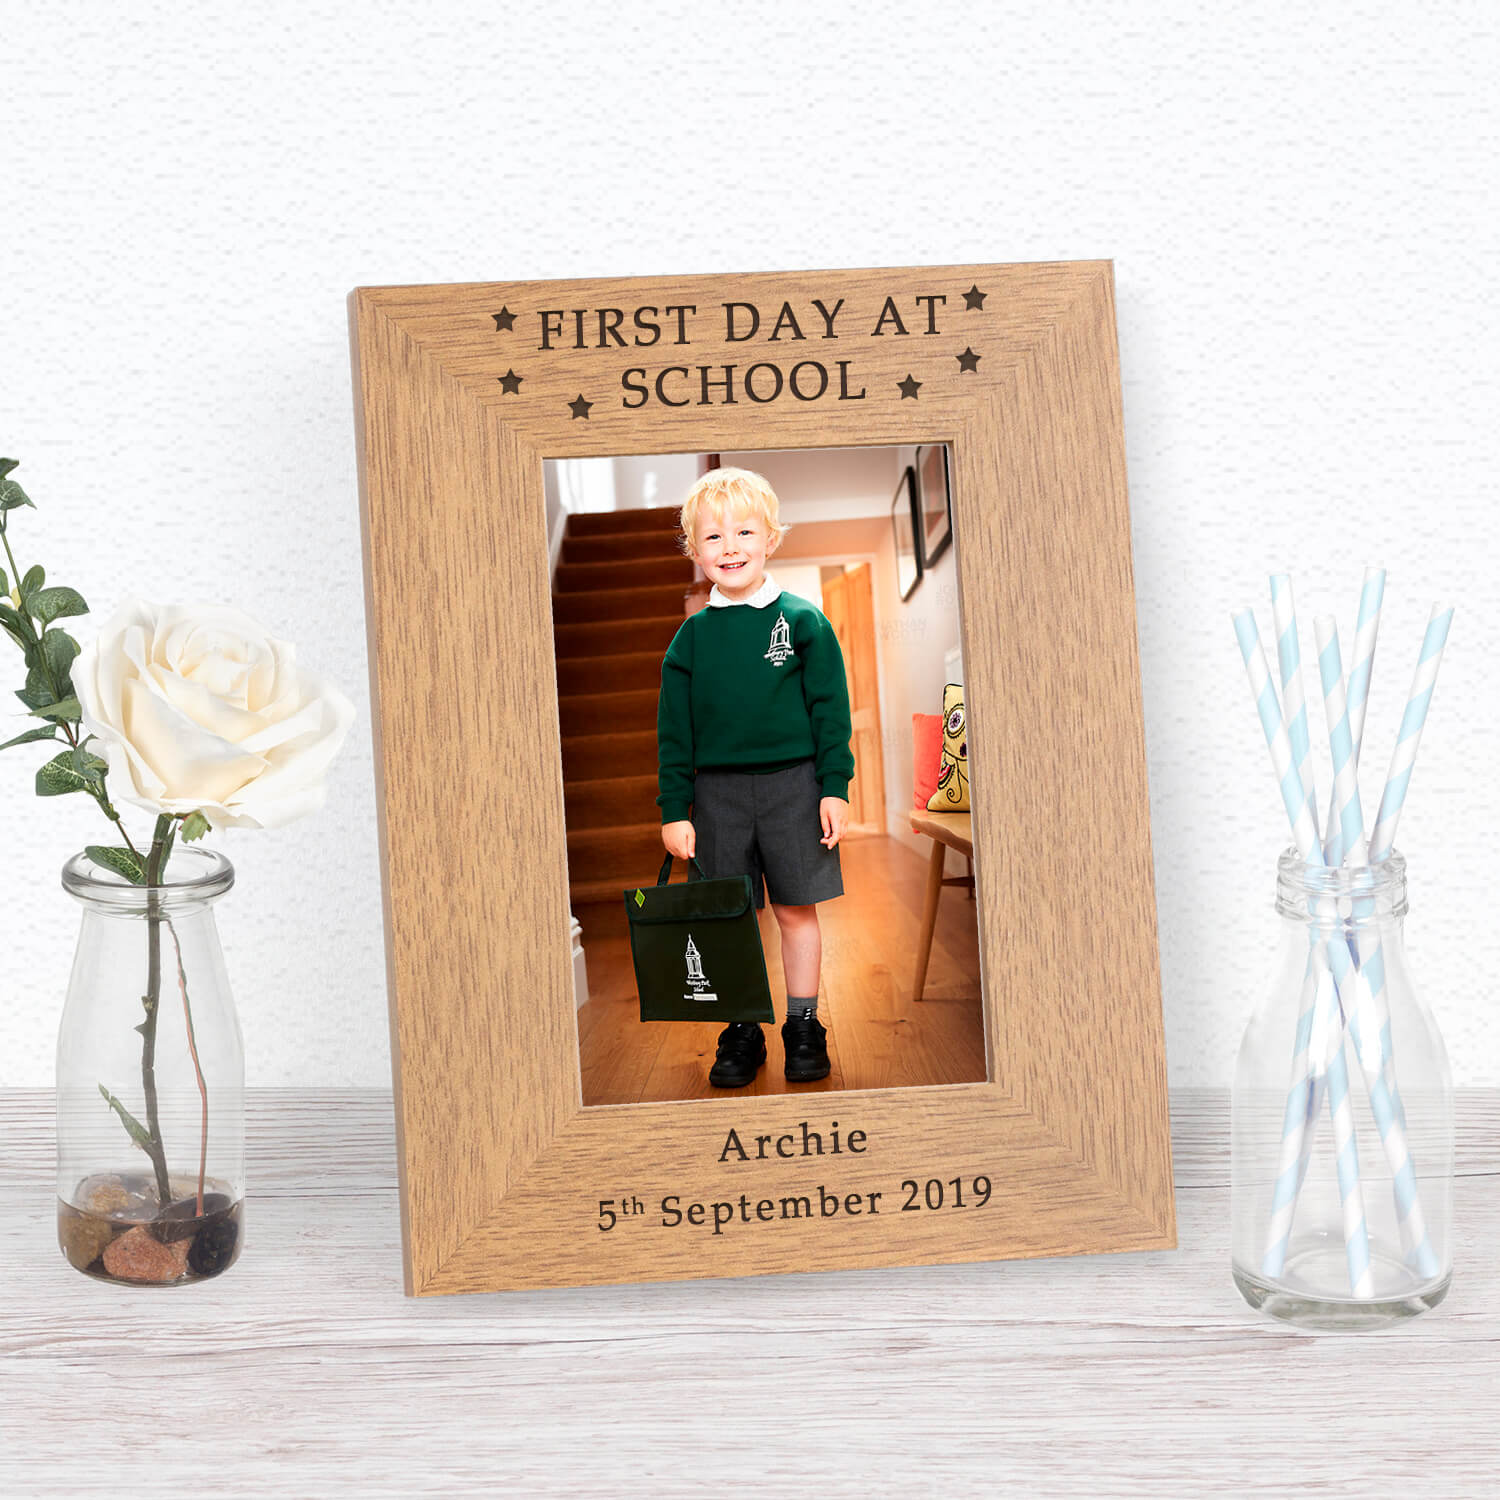 Personalised Wooden Photo Frame – 1st Day at School